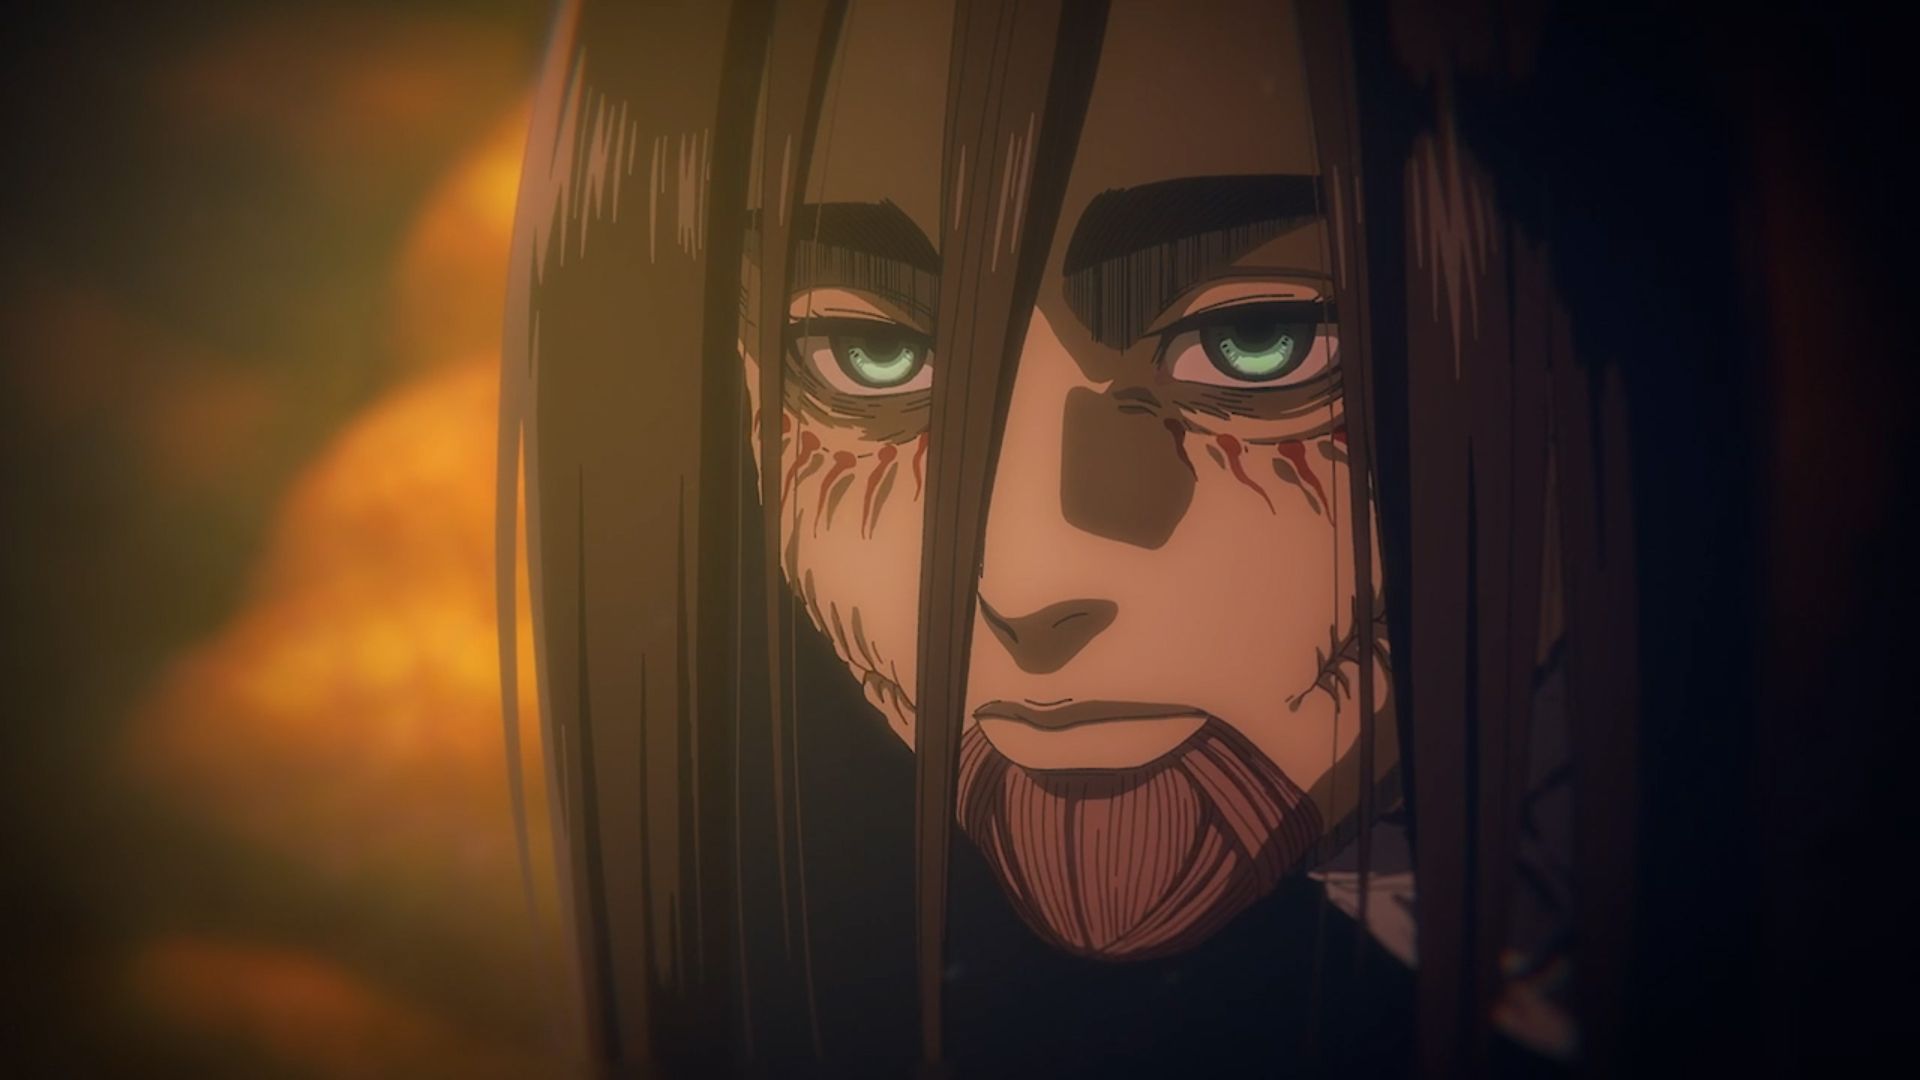 Attack on Titan Final Season Part 3 Episode 2 releases Fall 2023